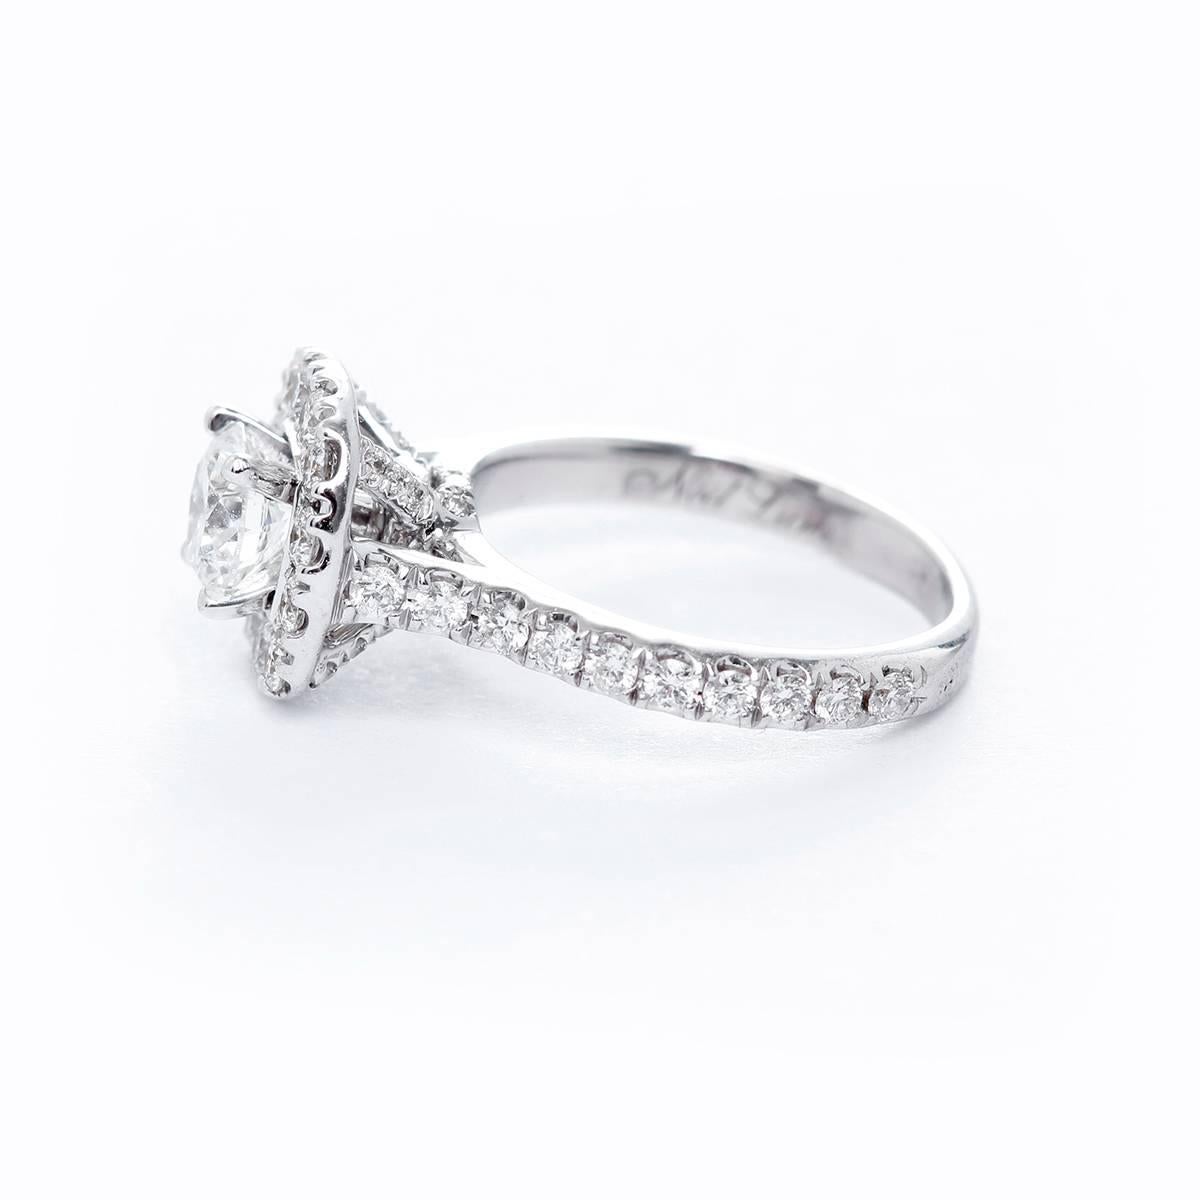 Neil Lane Bridal Collection 14k White Gold Round Diamond Sz 5 - . Classic yet luxurious engagement ring from Neil Lane is crafter in 14k White Gold. With a Center stone of .69ct, bordered with a halo frame of smaller sccent diamonds. Neil Lane's